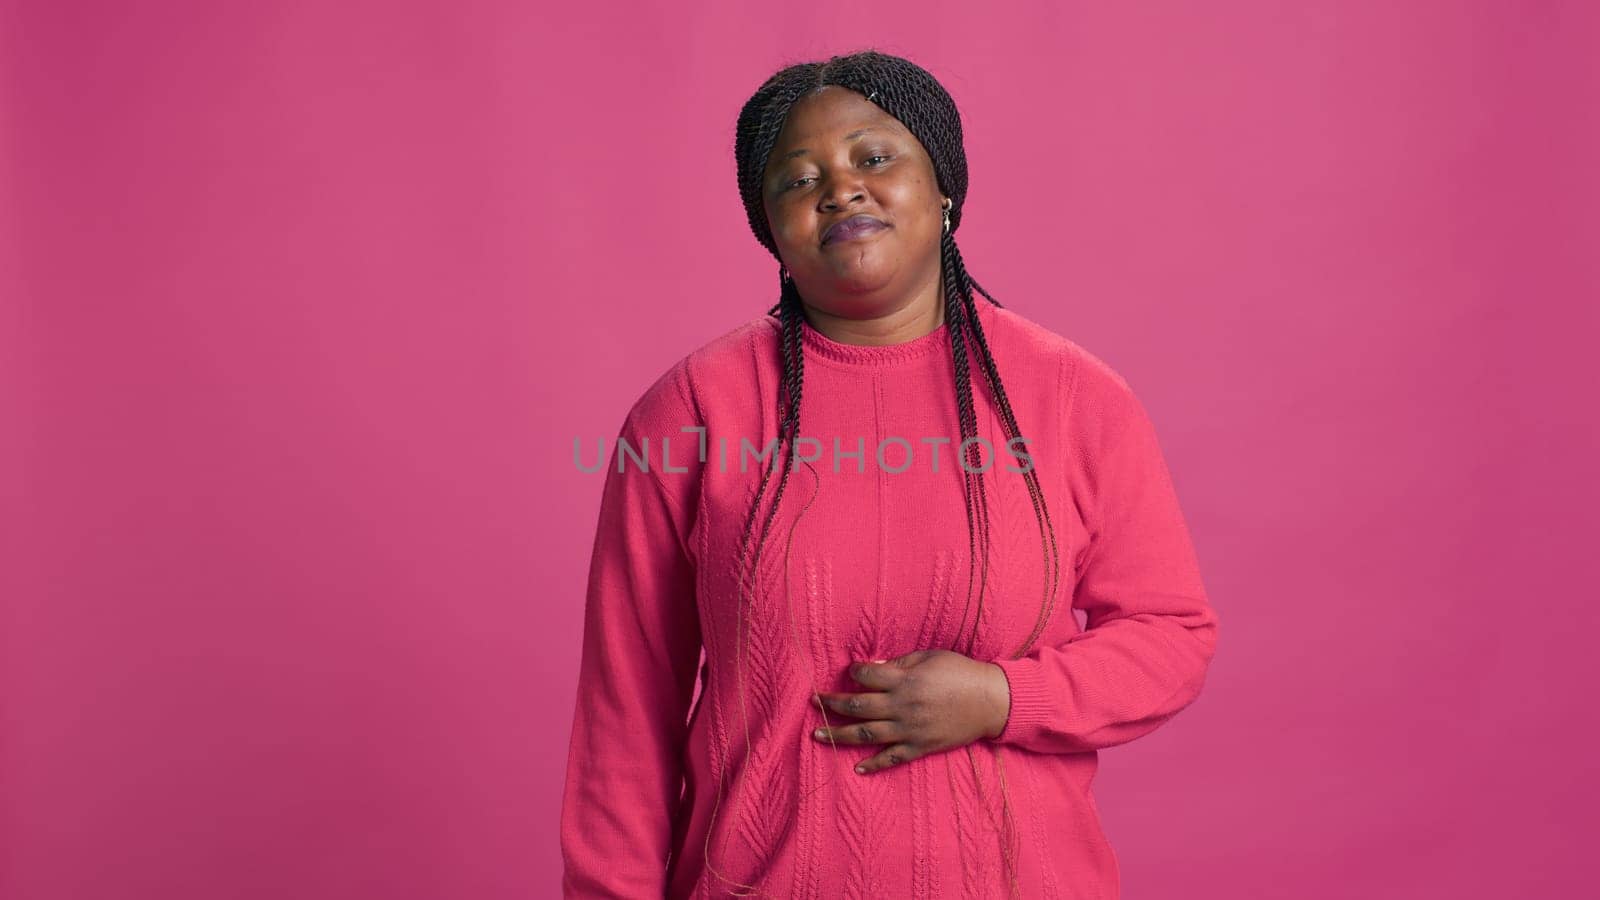 Youthful female looking at camera and showing unhappy facial expression against pink backdrop. Sorrowful african american woman standing in front of isolated background.